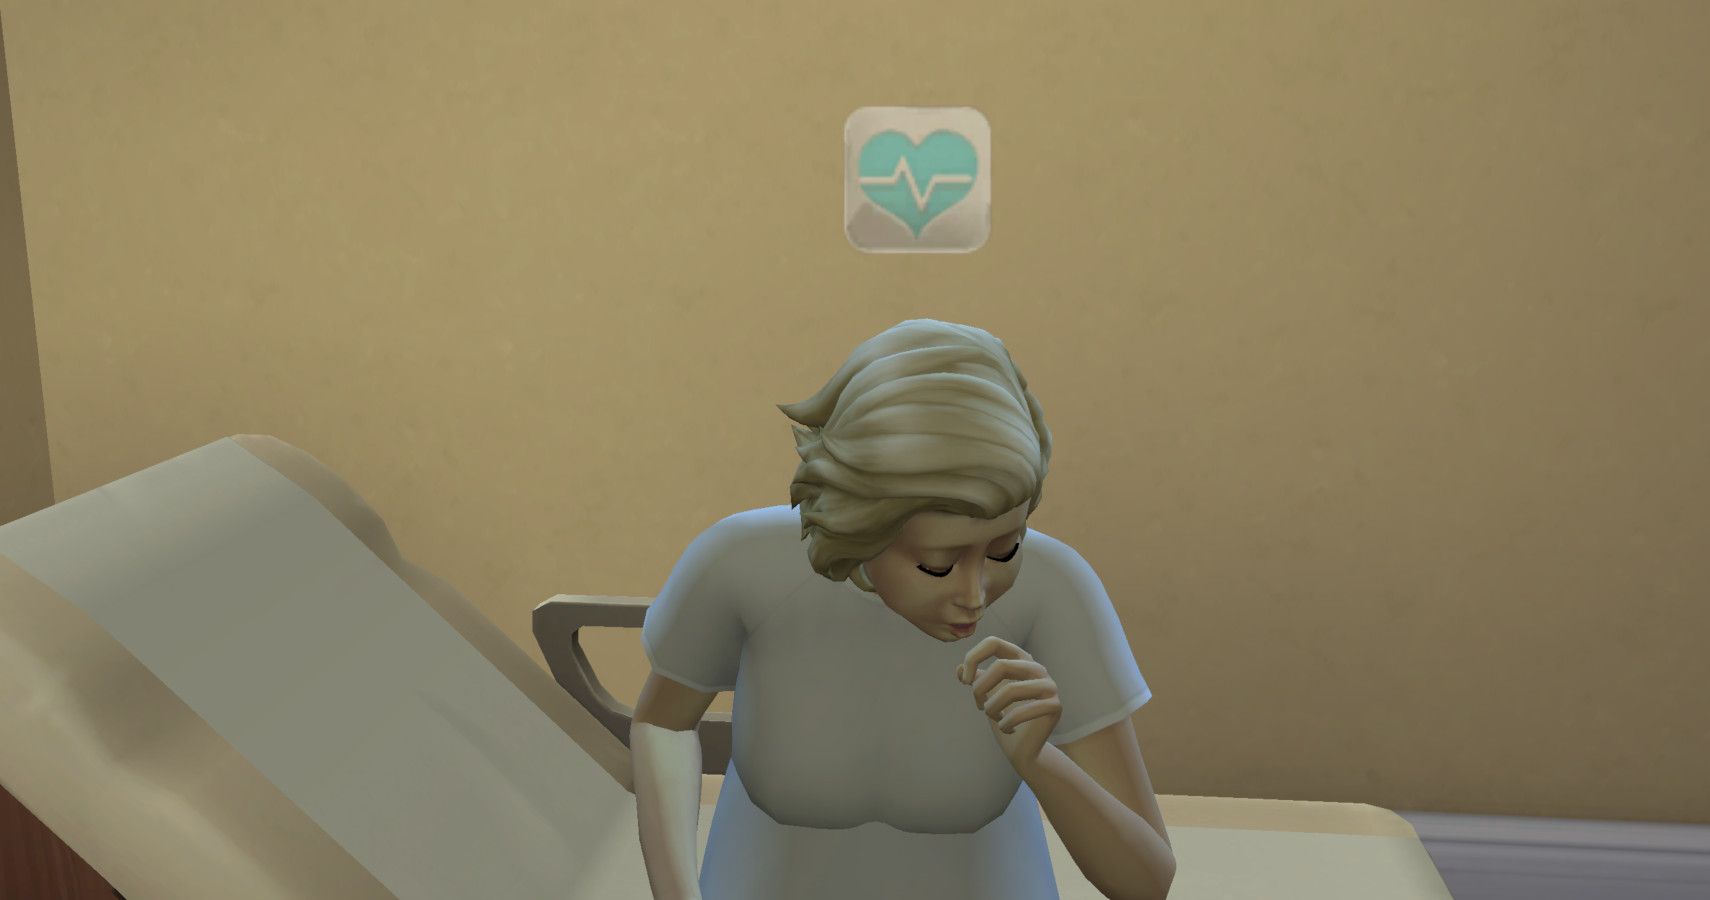 A Sim coughing